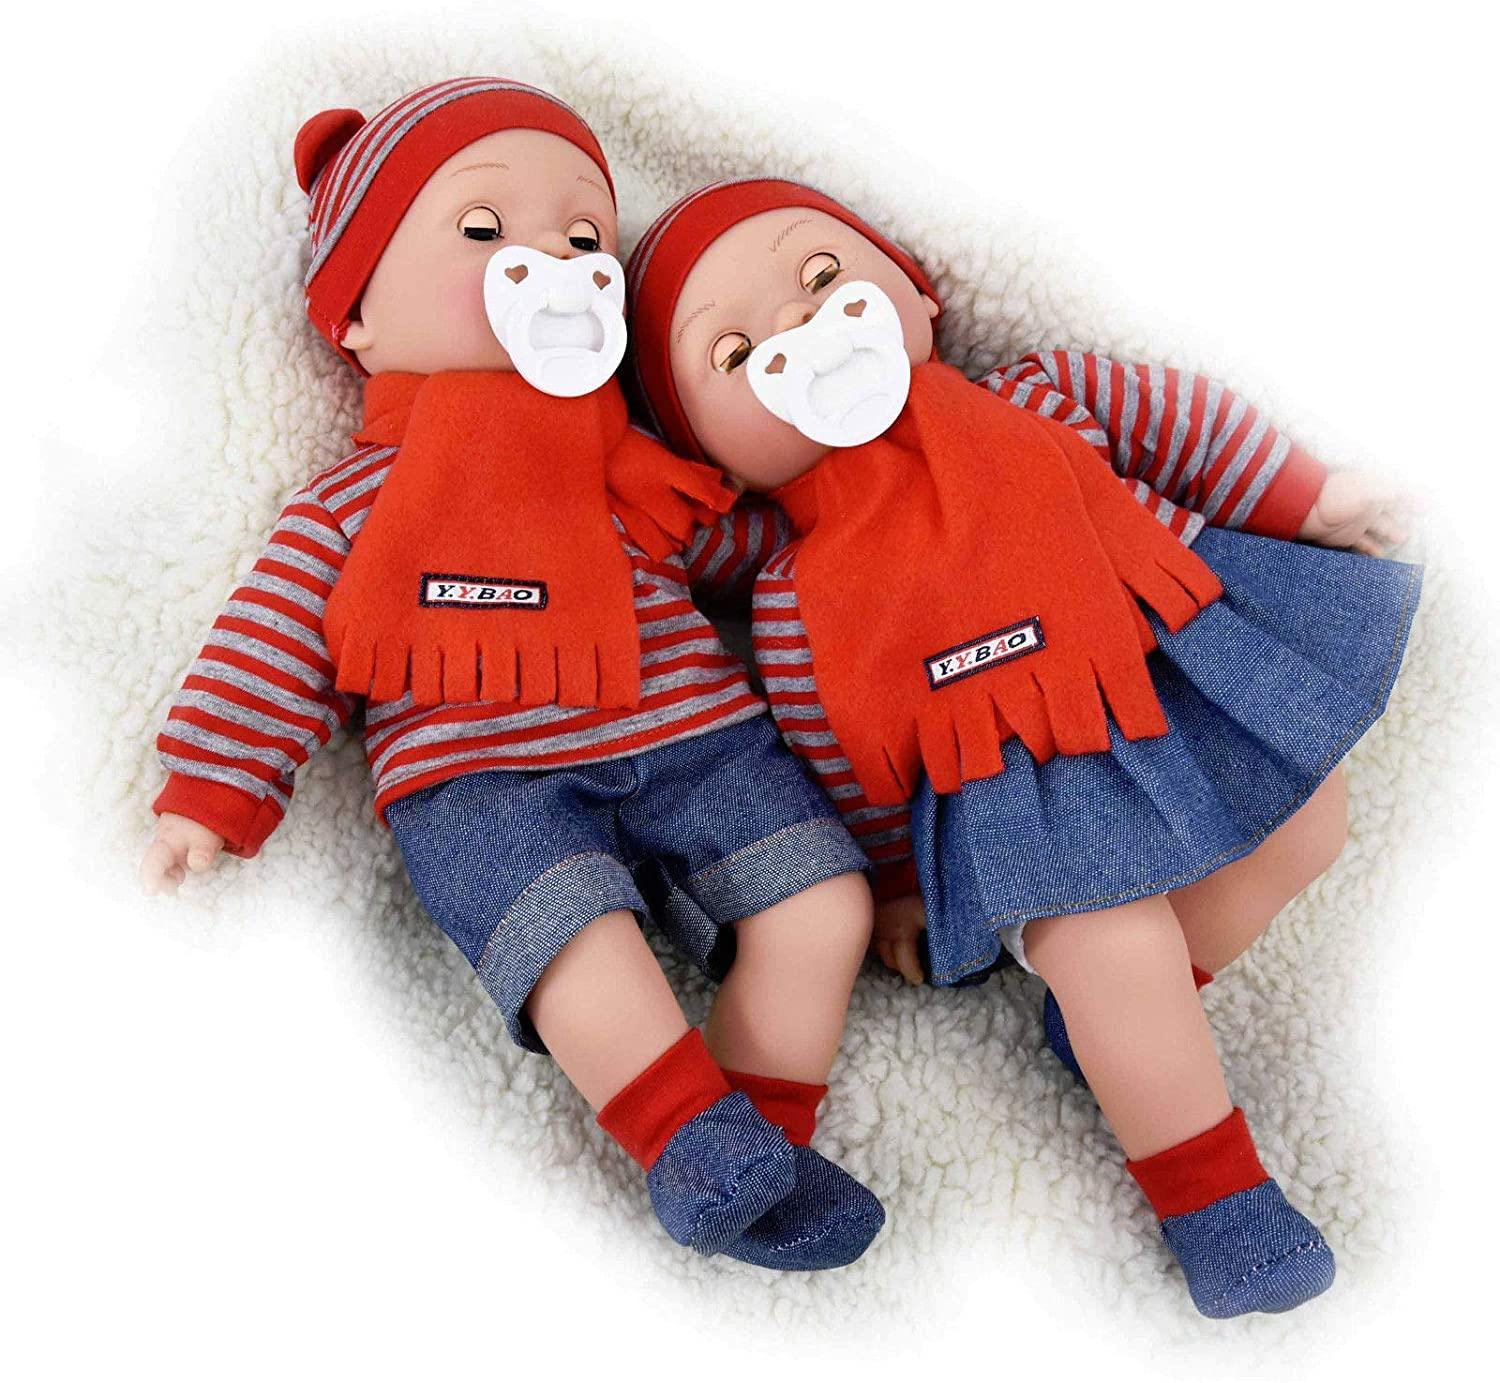 16" Real Touch Poseable New Born Baby Boy Girl Doll with Freckles - Home Inspired Gifts